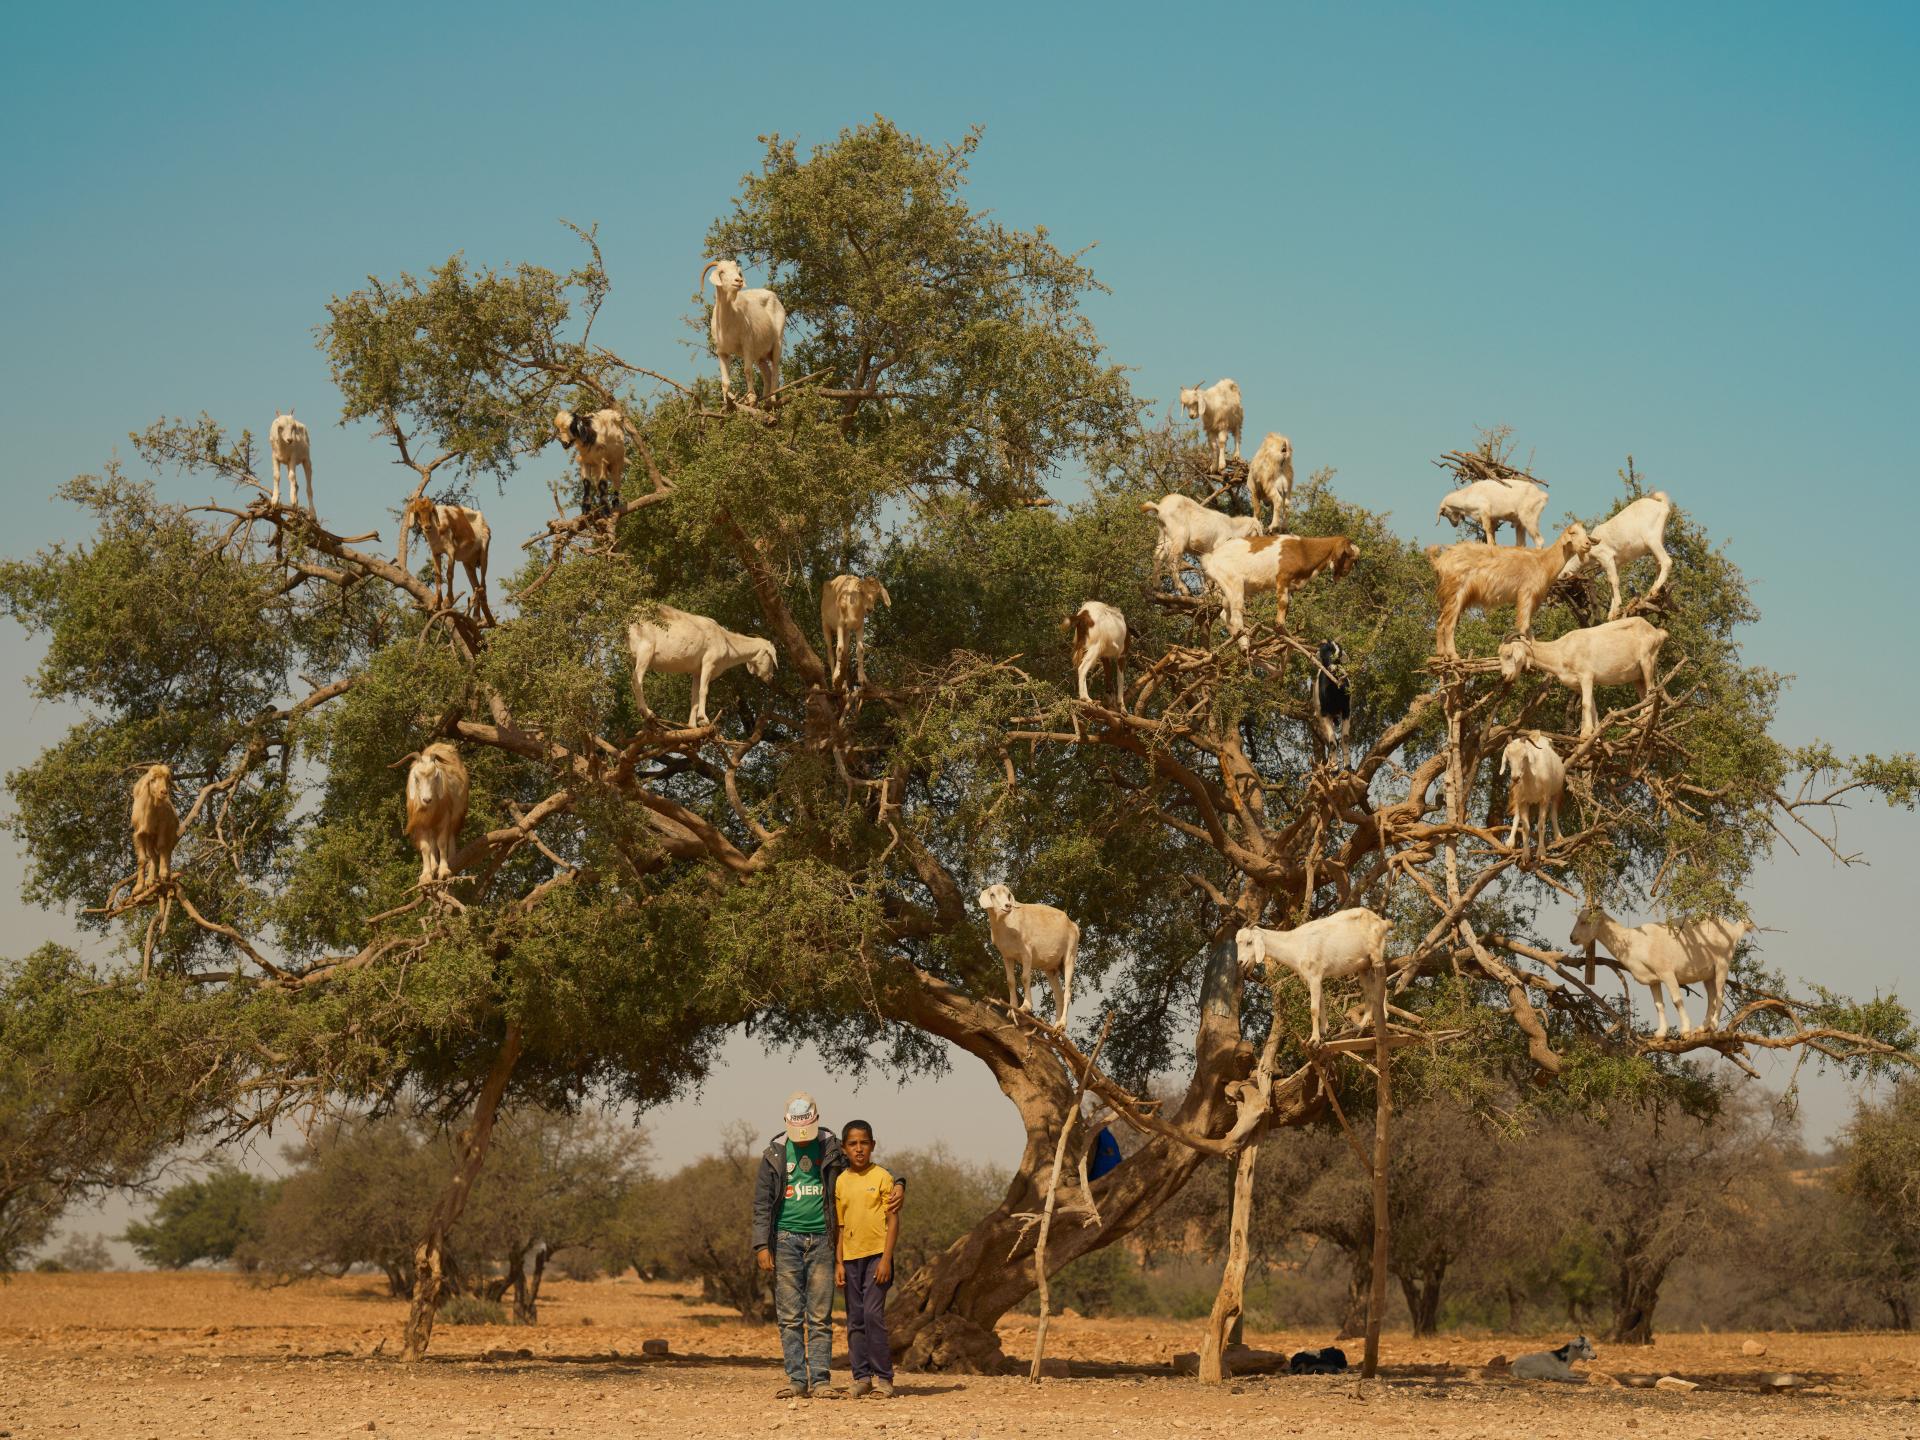 London Photography Awards Winner - The Boys and the Goats